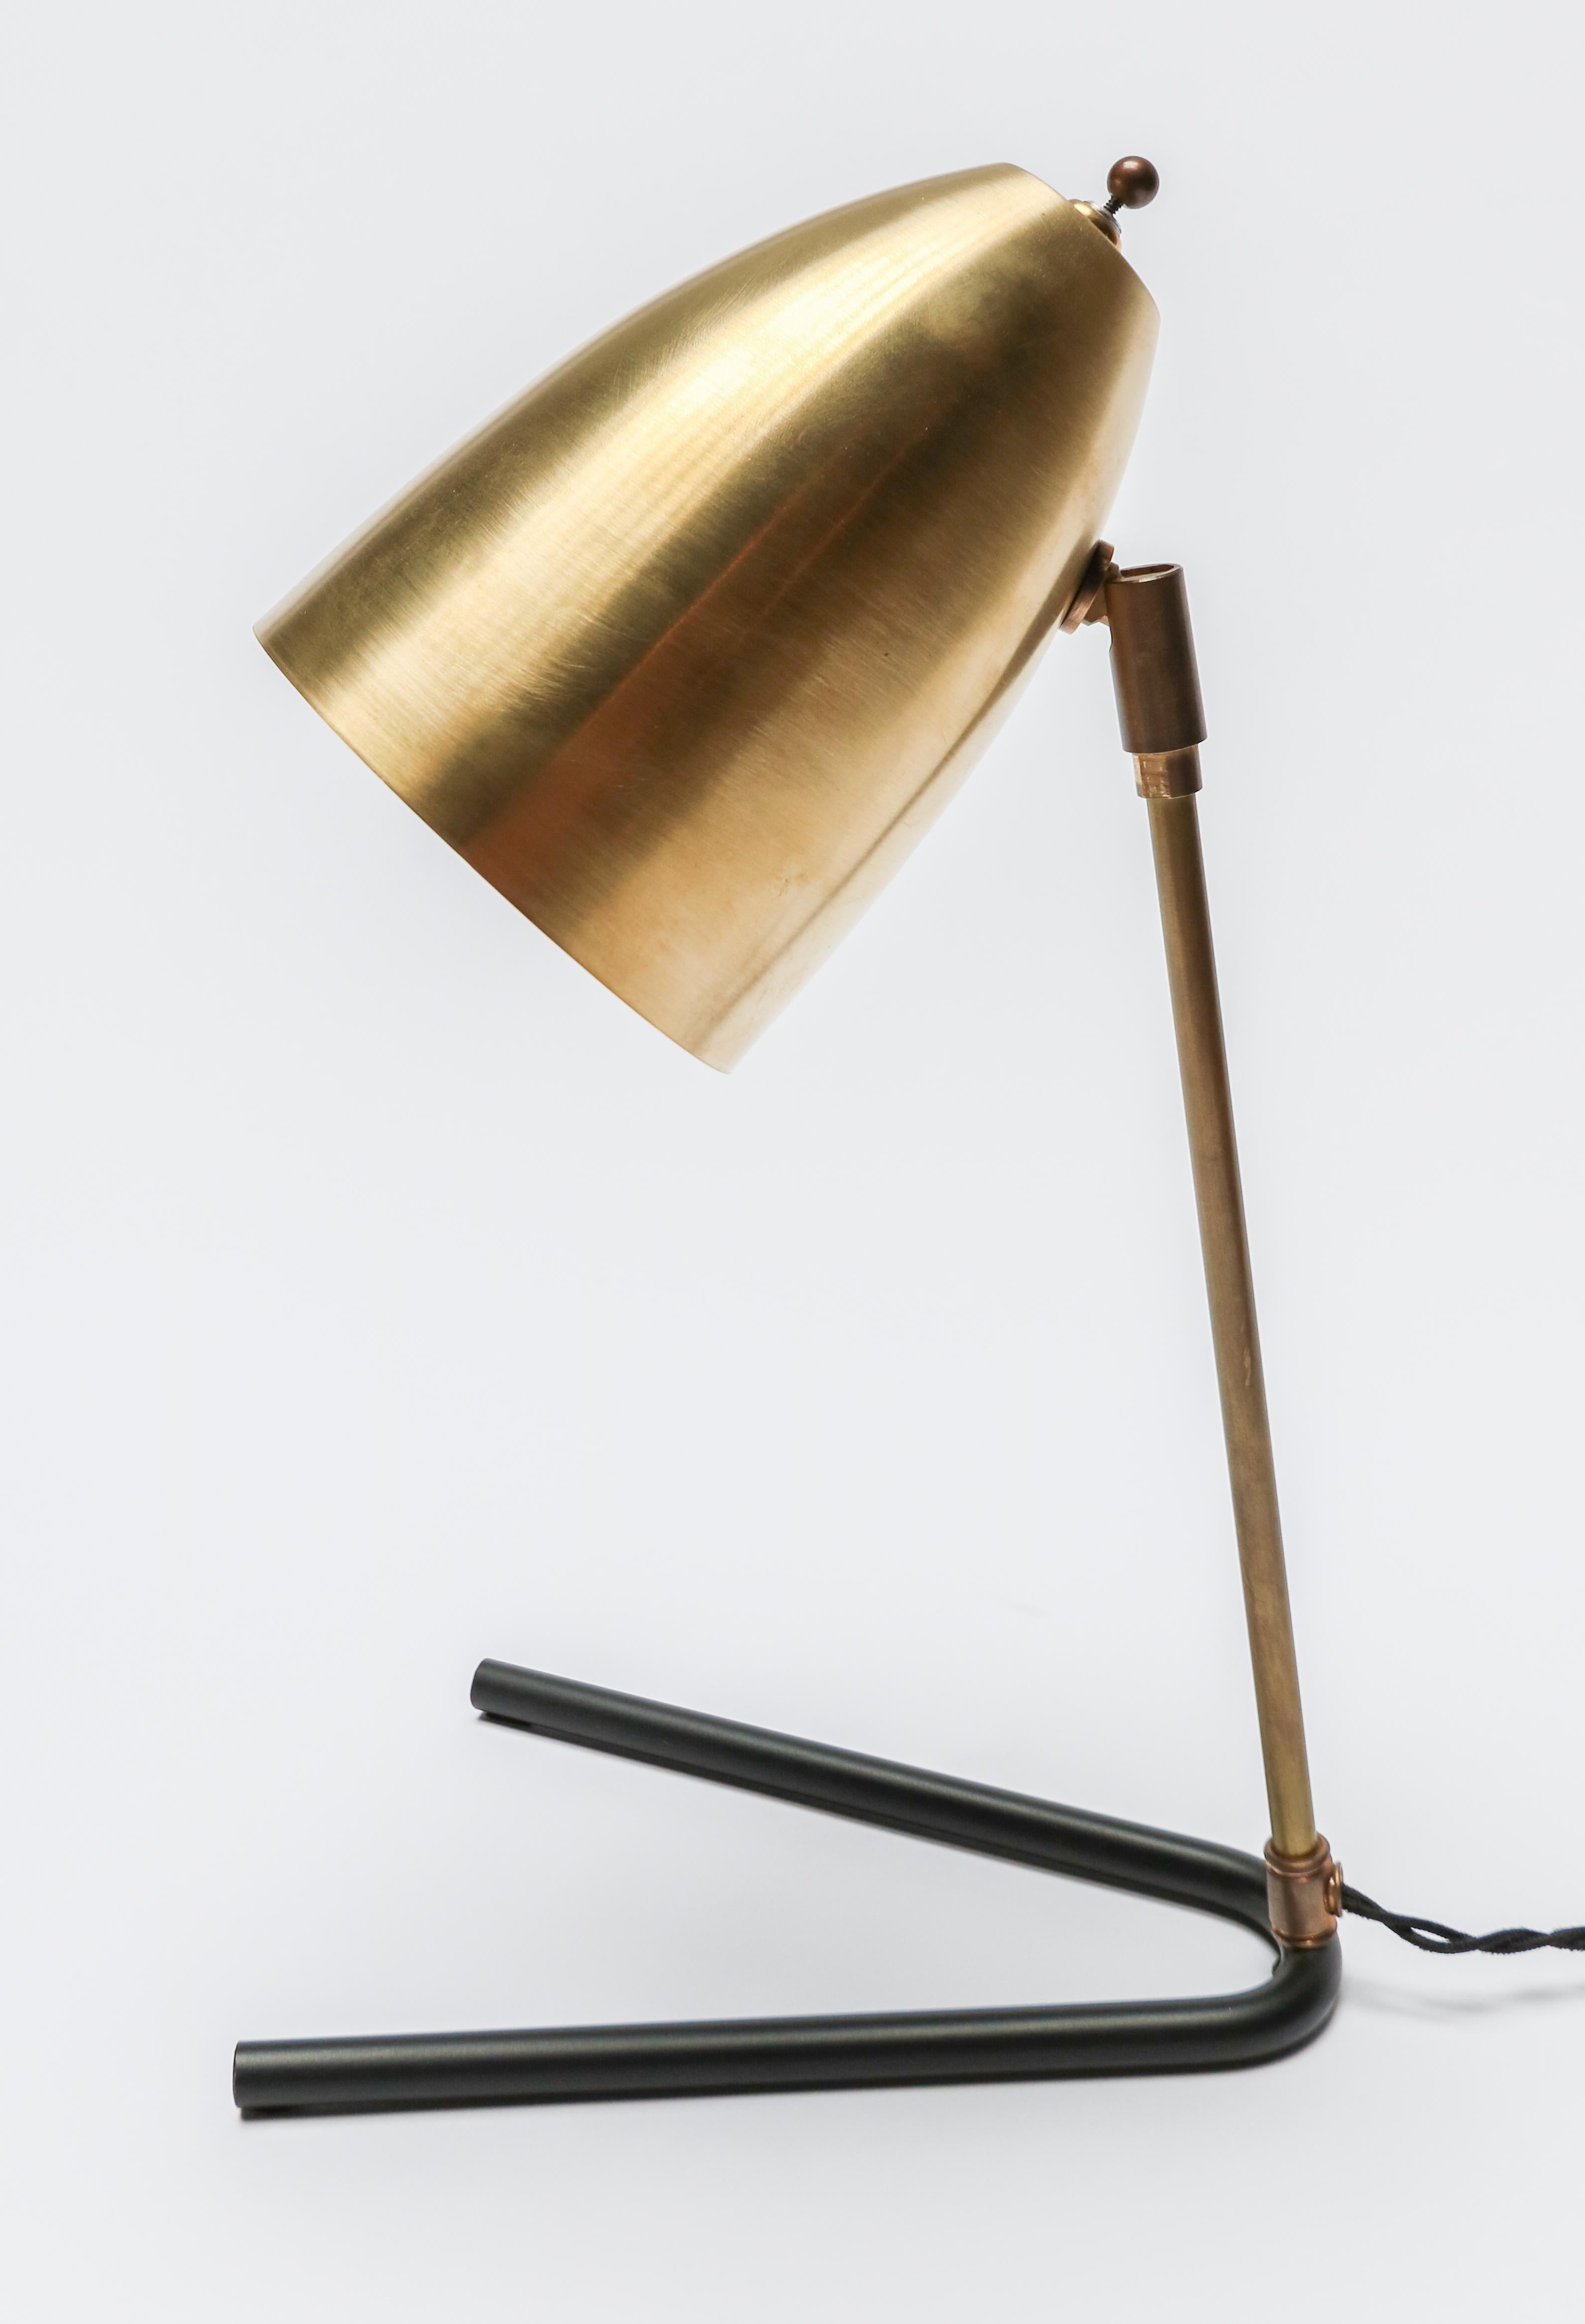 Custom midcentury style desk lamp with brass shade and black metal base by Adesso Imports.